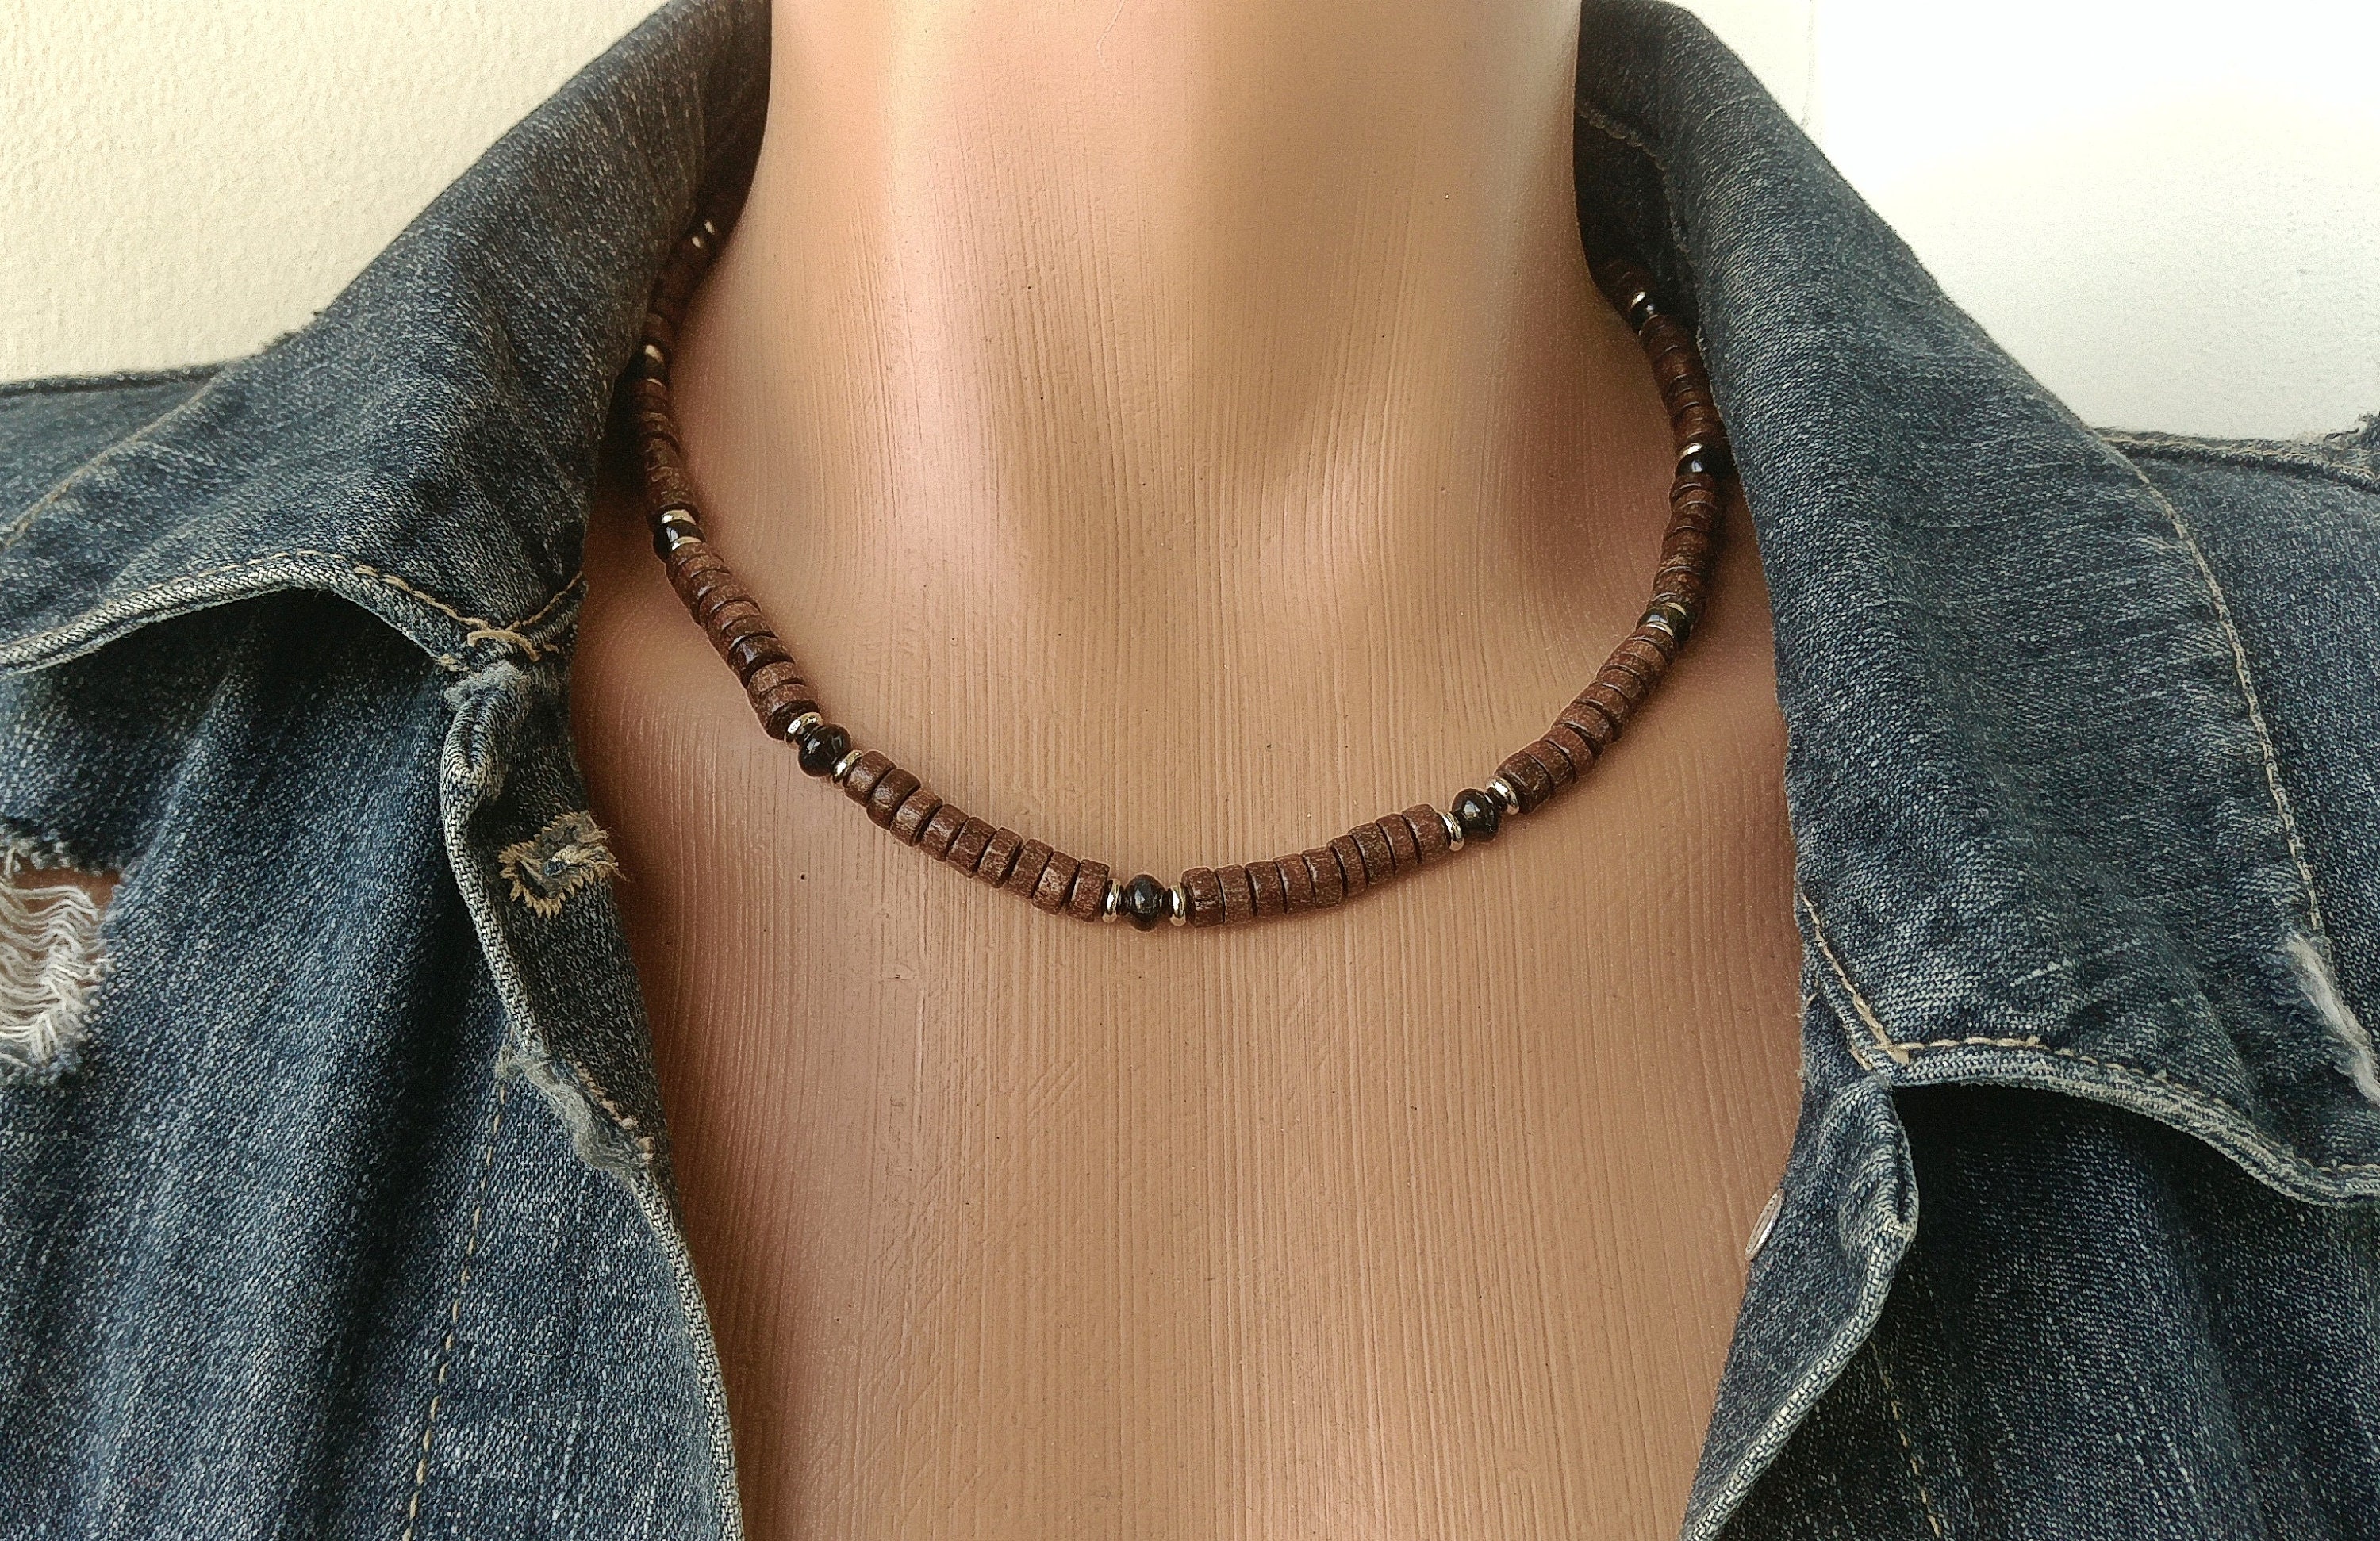 Buy Nail and Screw Necklace, Leather Choker, Short Necklace, Choker for Men,  Gift for Him, Unique Holiday Gift Online in India - Etsy